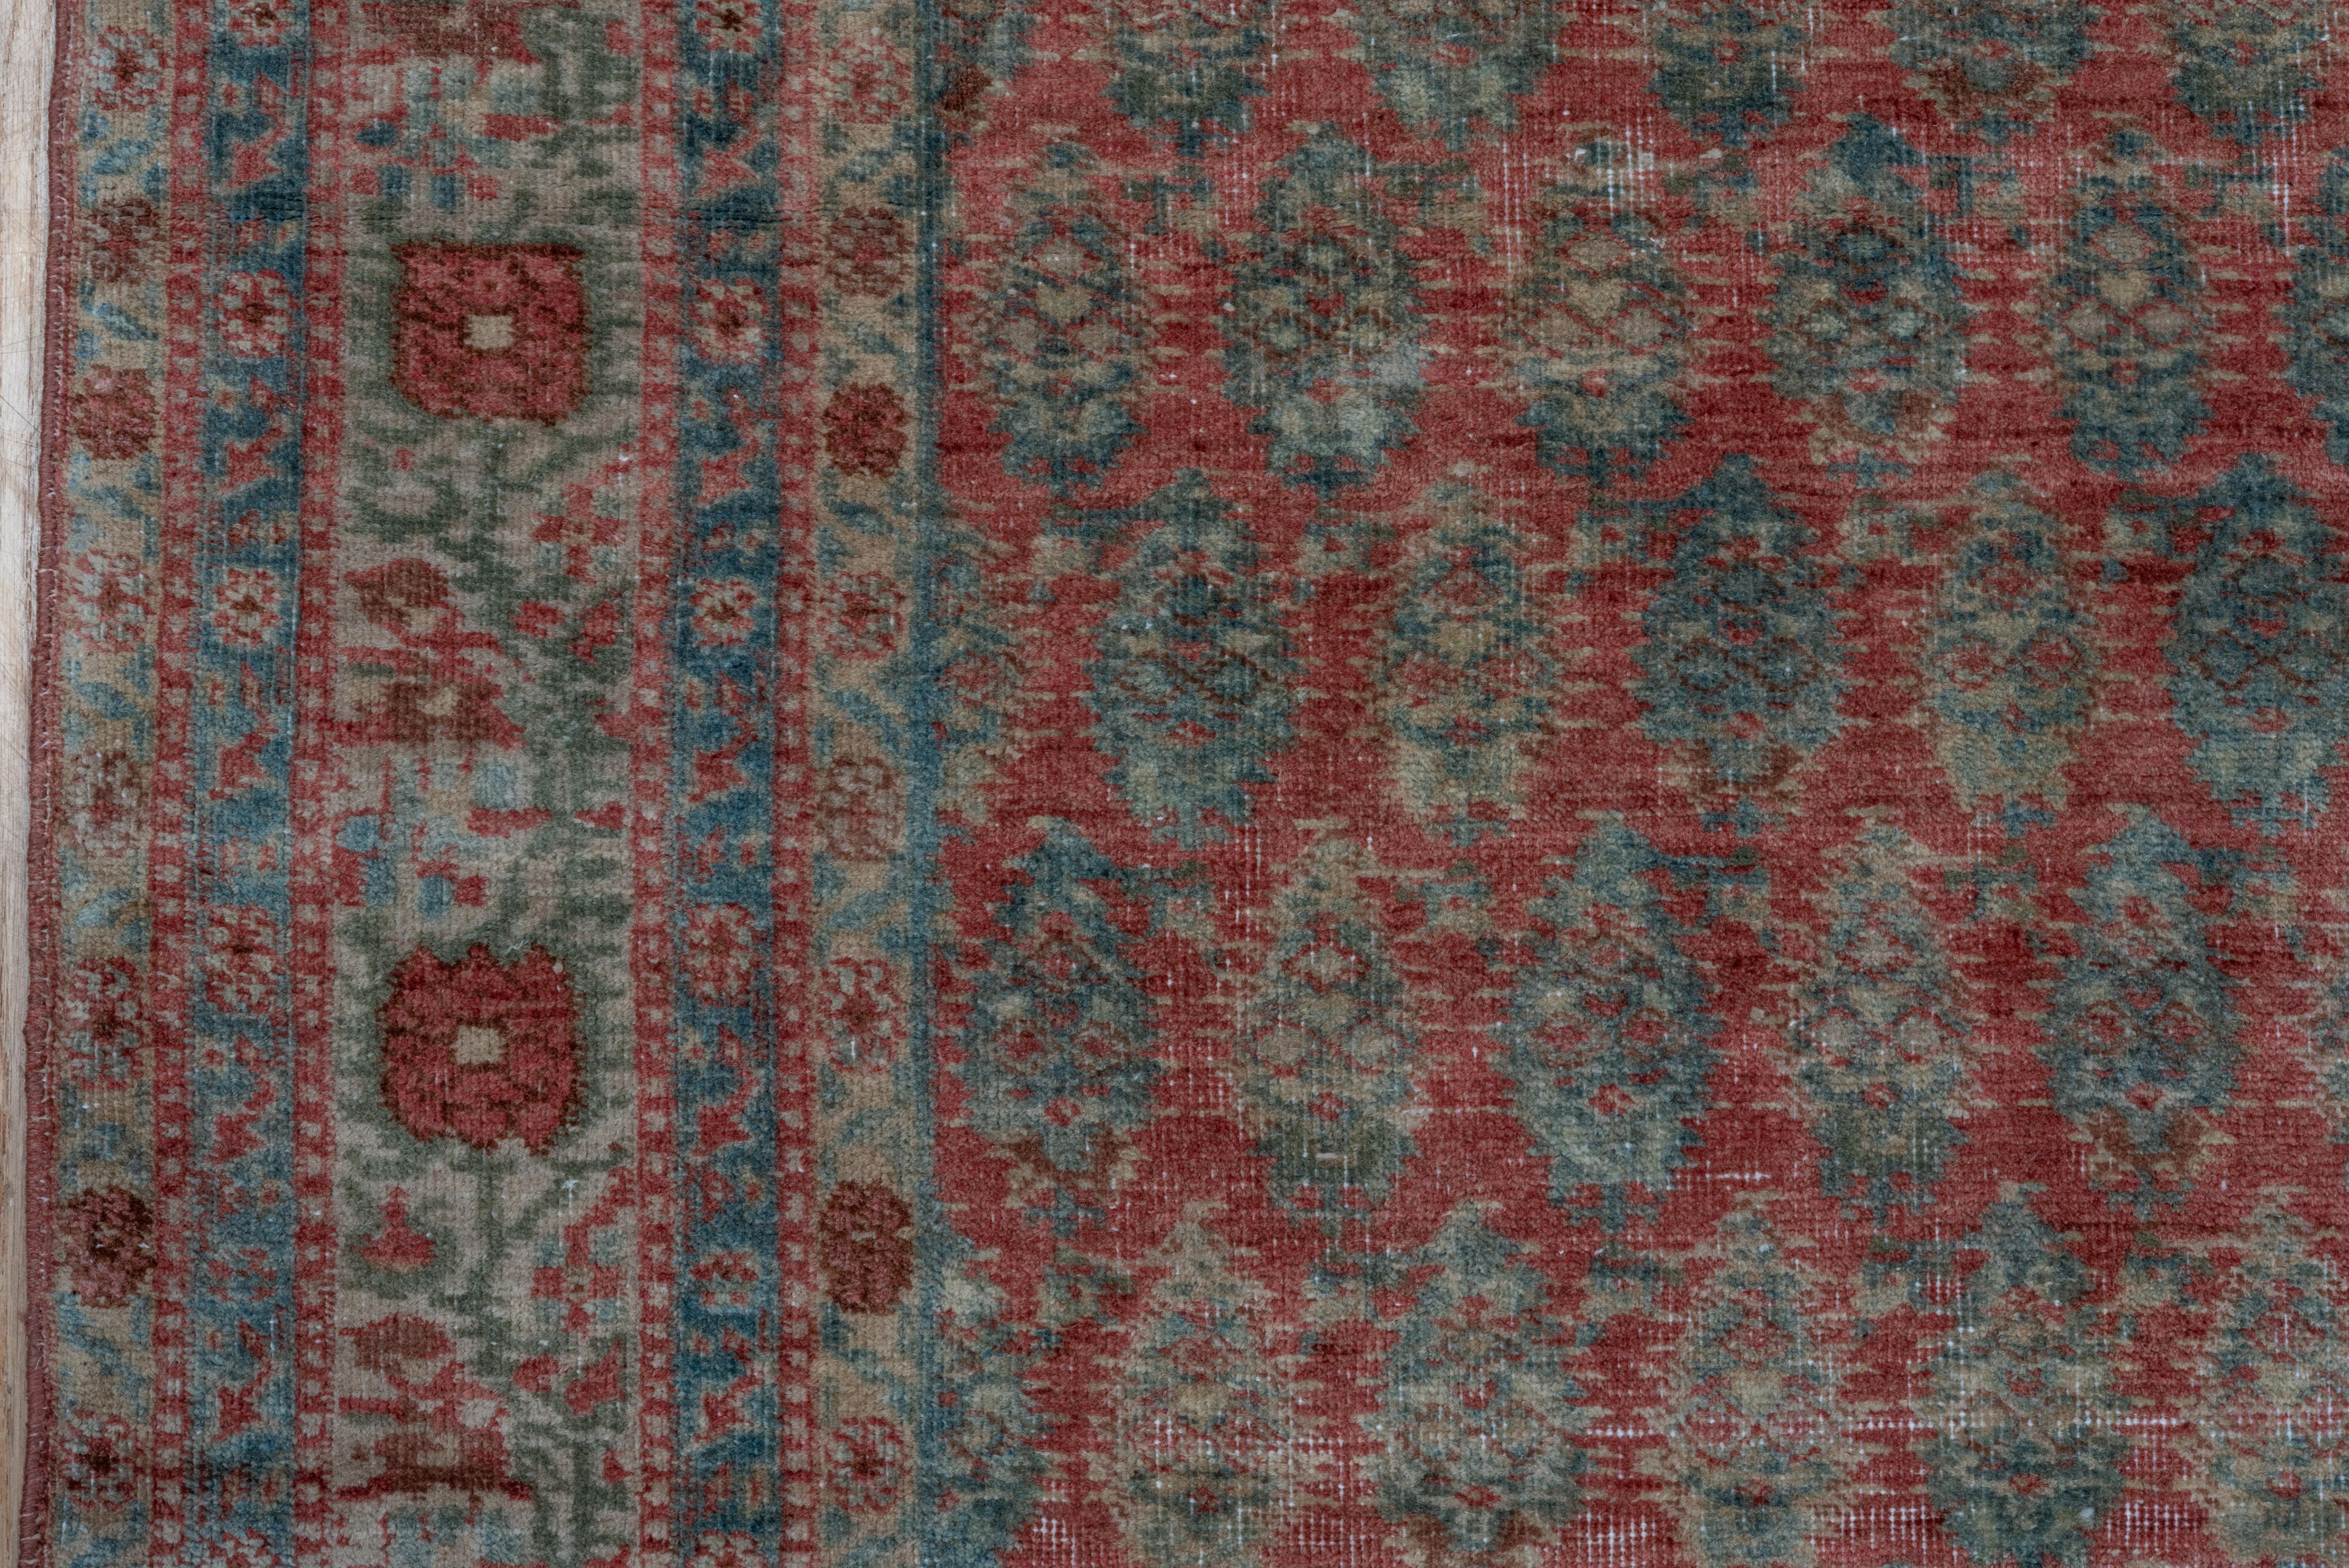 Wool Antique Turkish Sivas Rug, Saraband Design, Red and Blue Tones, circa 1920s For Sale